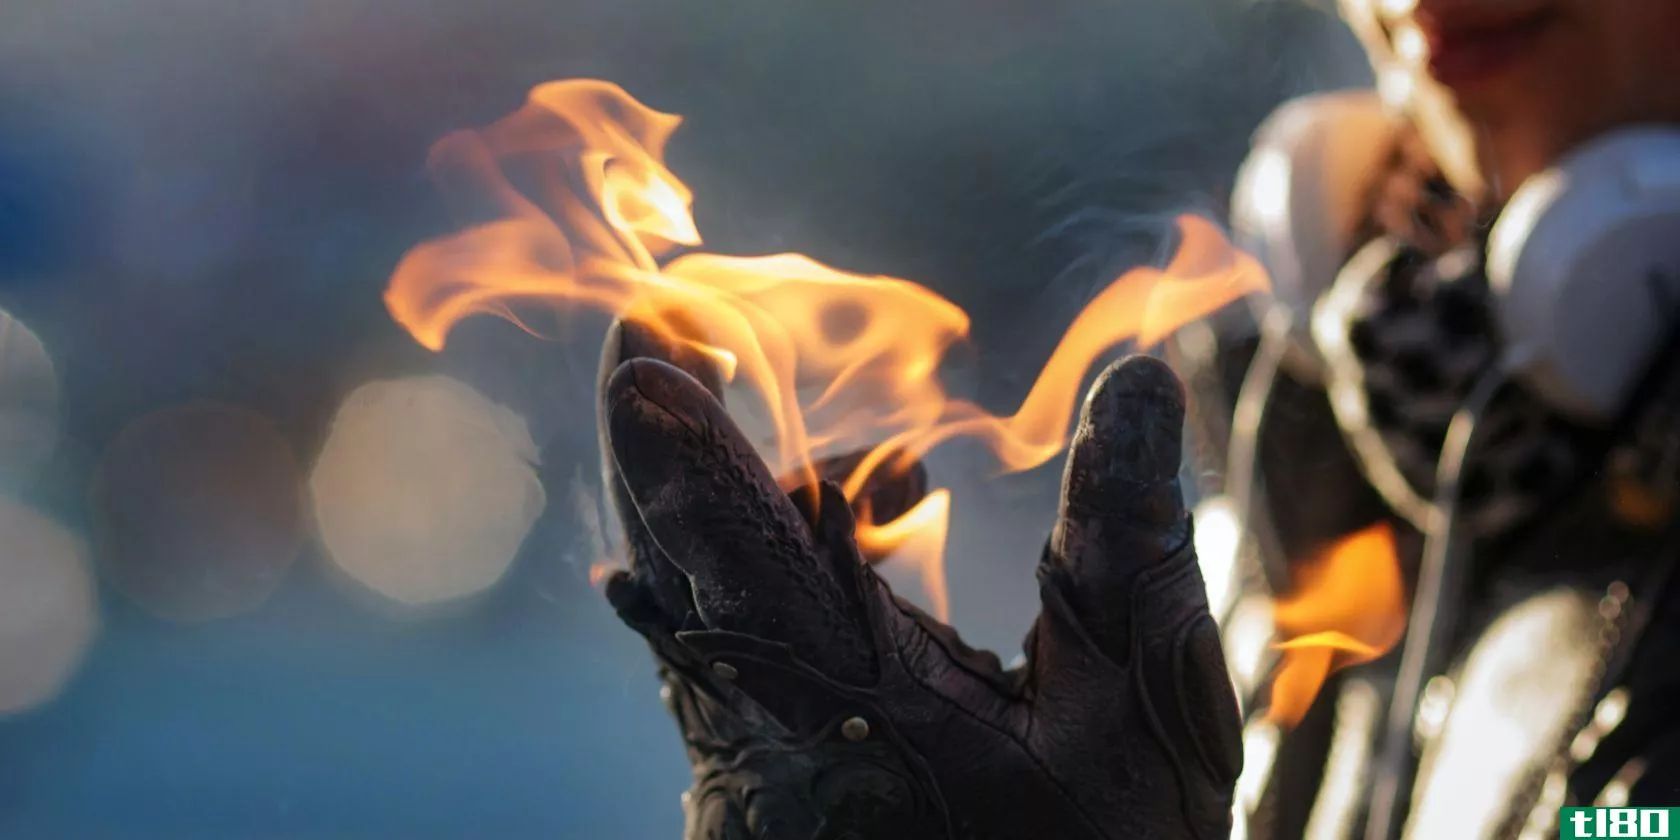 a person weraing headphones holds fire in a gloved hand